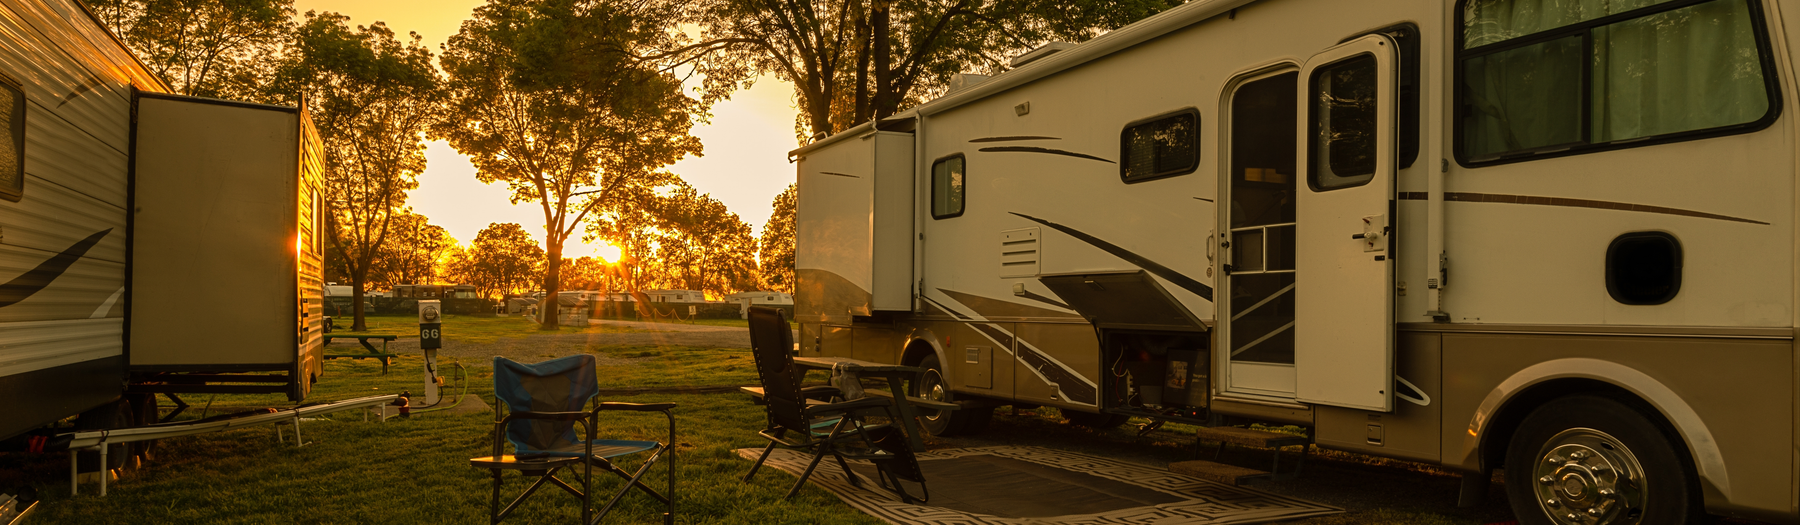 Introducing ATI's New RV and Trailer Power Page